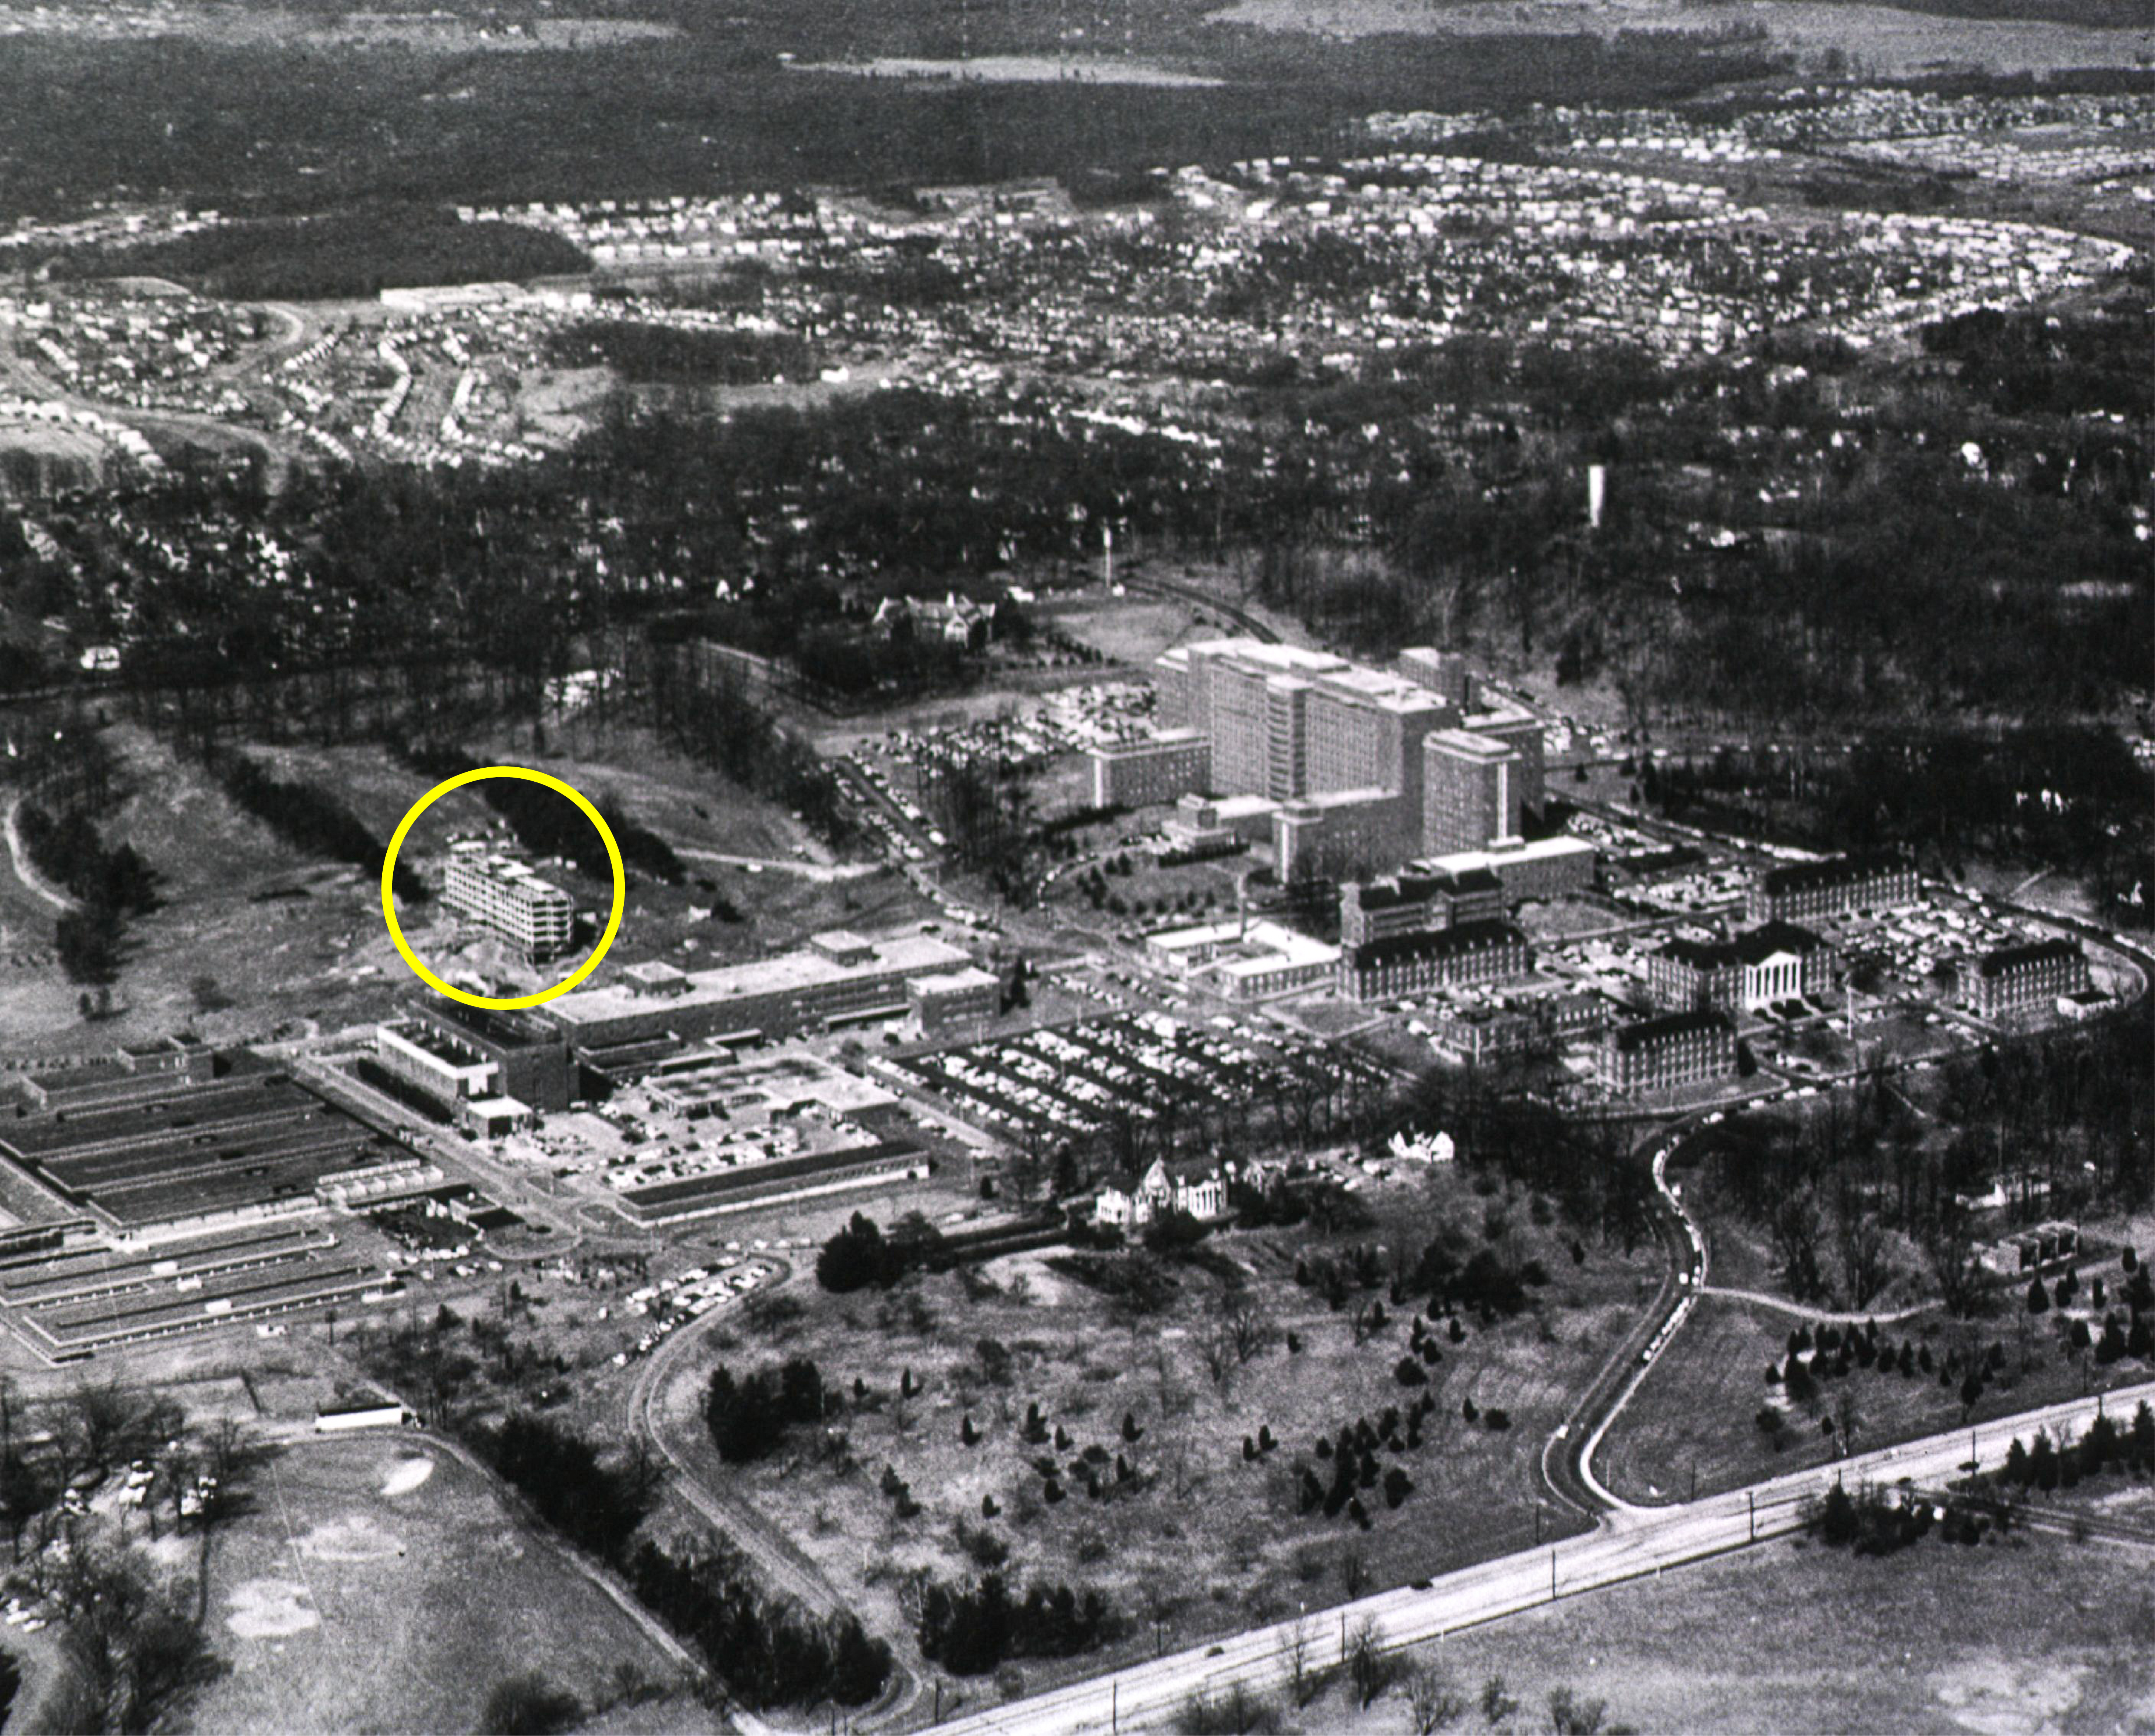 ca. 1960 black and white aerial image of NIH Bethesda campus with Building 29 under construction cirlced